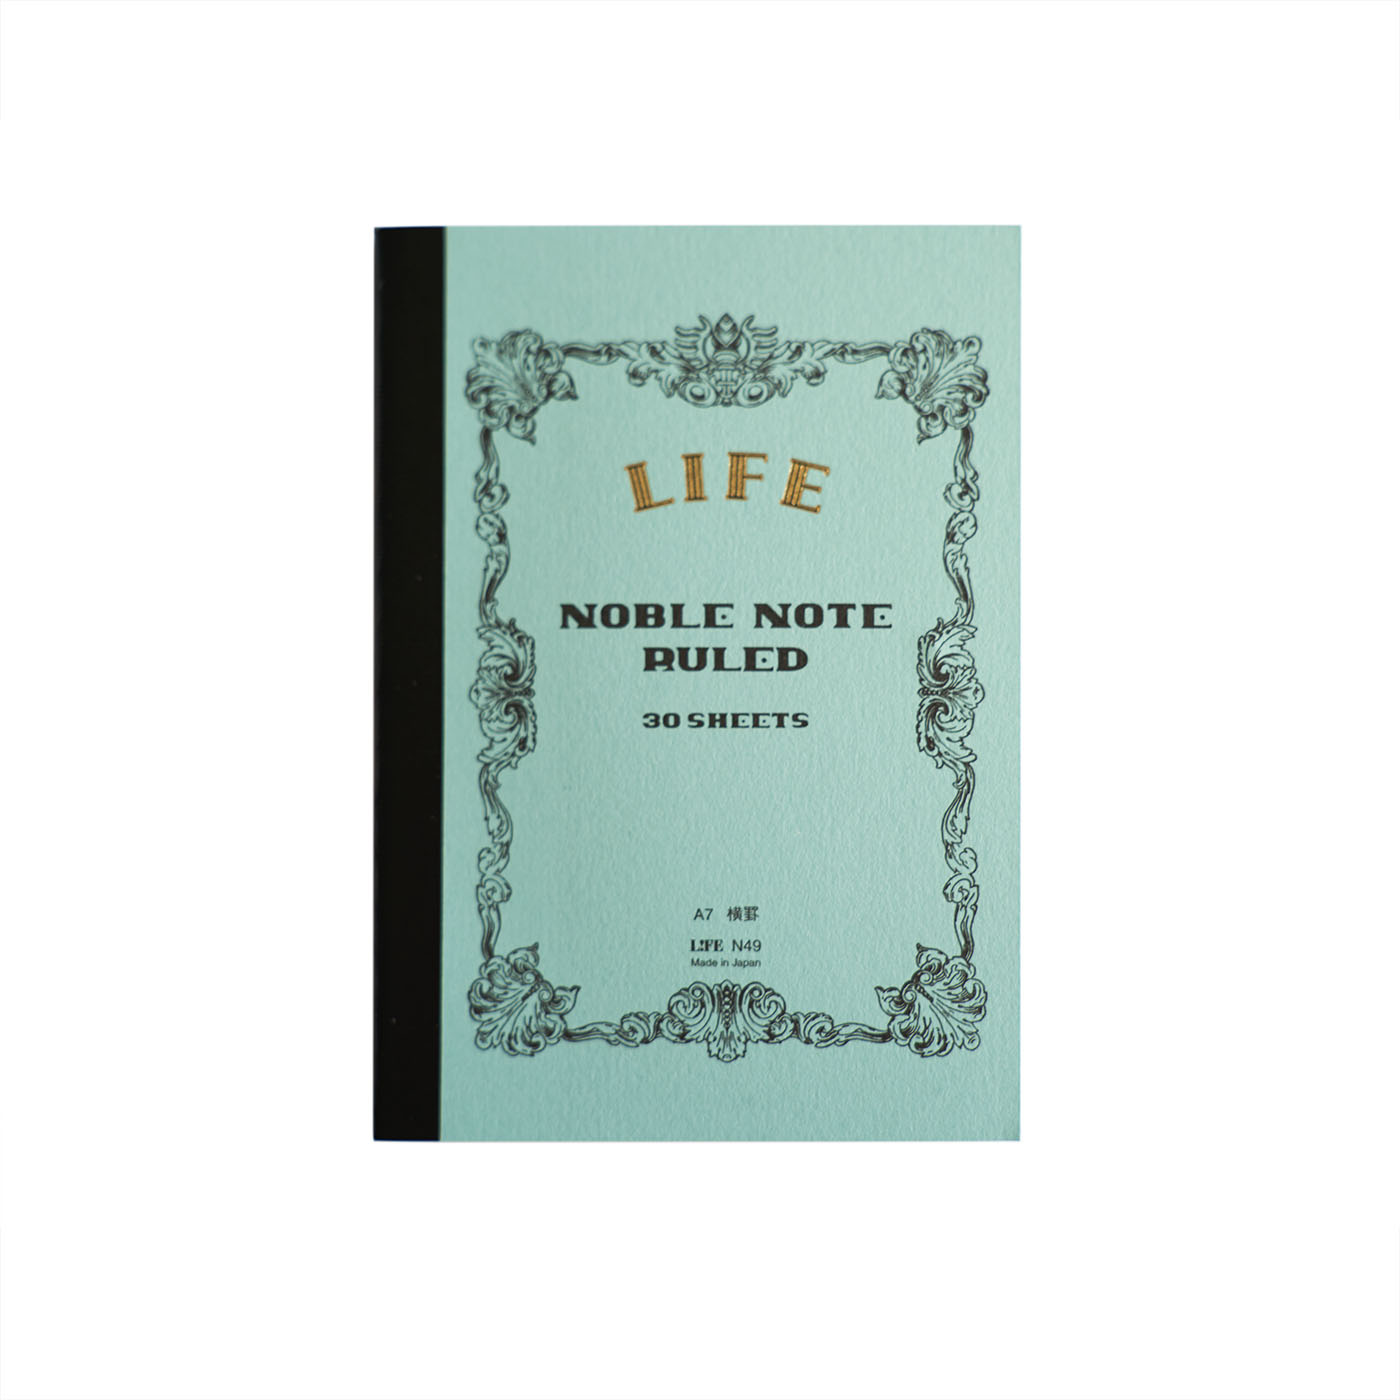 LIFE Japan Noble Note Mini Ruled Made in Japan Pocket Notebook Fountain Pen friendly pocket notebook